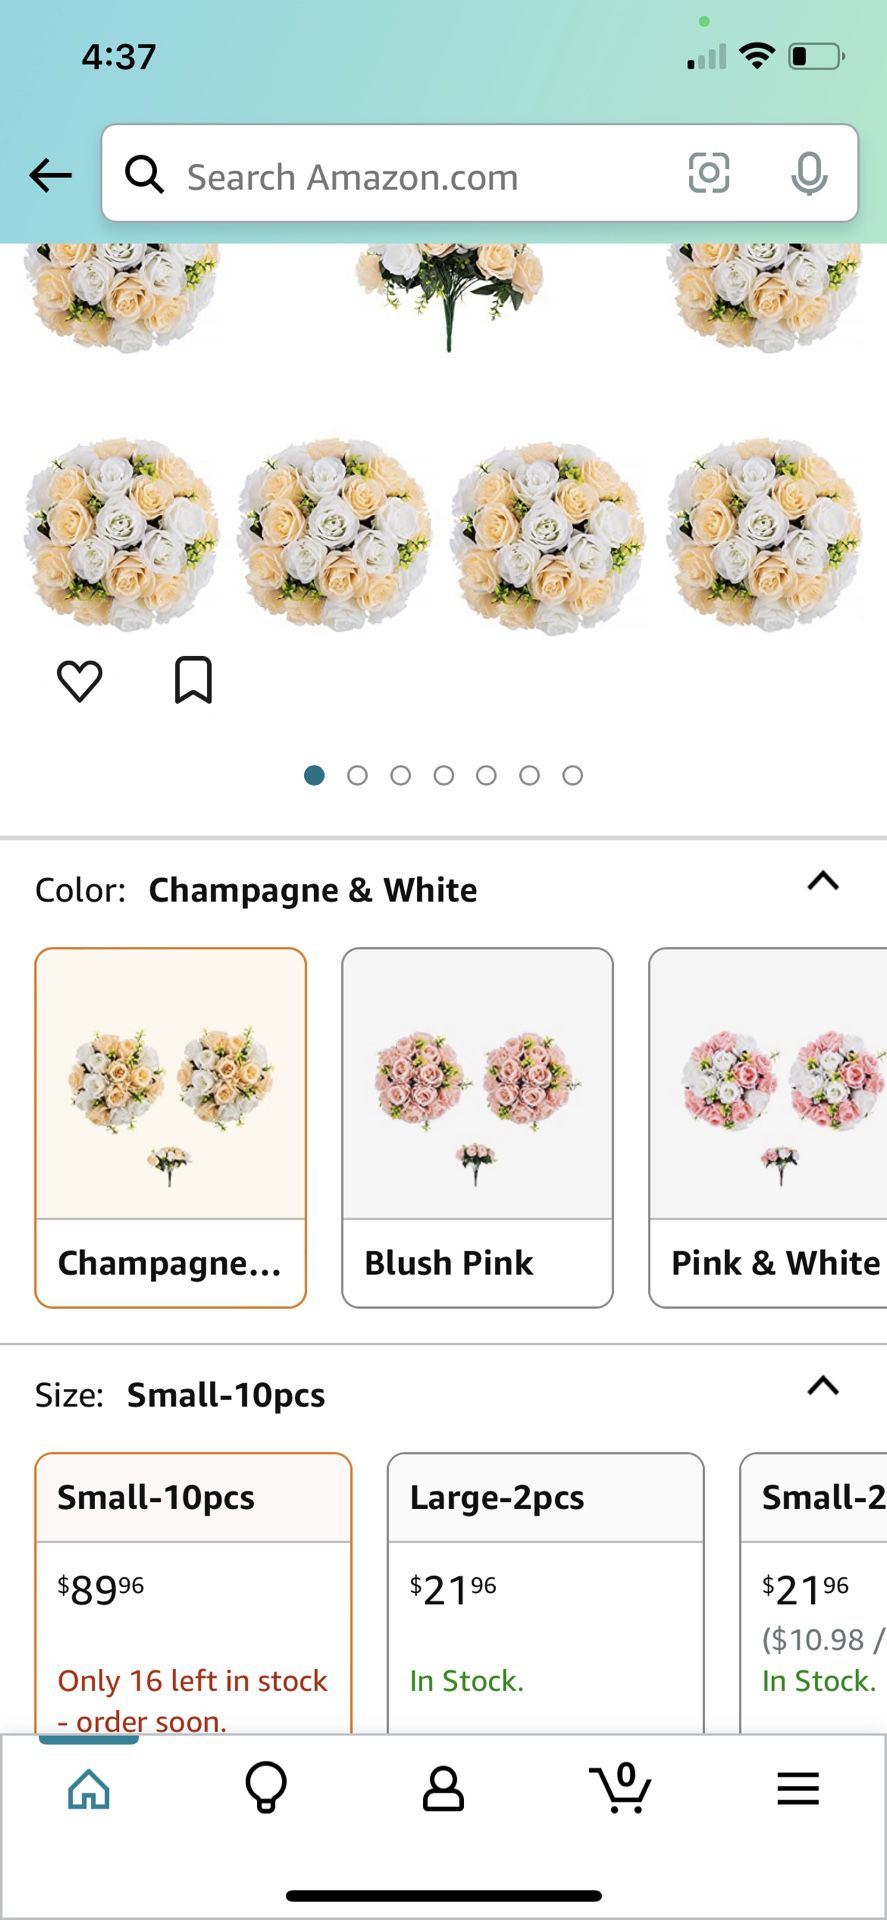 Nuptio Flower Ball Arrangement Bouquet: 10 Bunches of 15 Buds Champagne & White Fake Flowers Roses Balls for Centerpieces Tables - Artificial Rose Arr